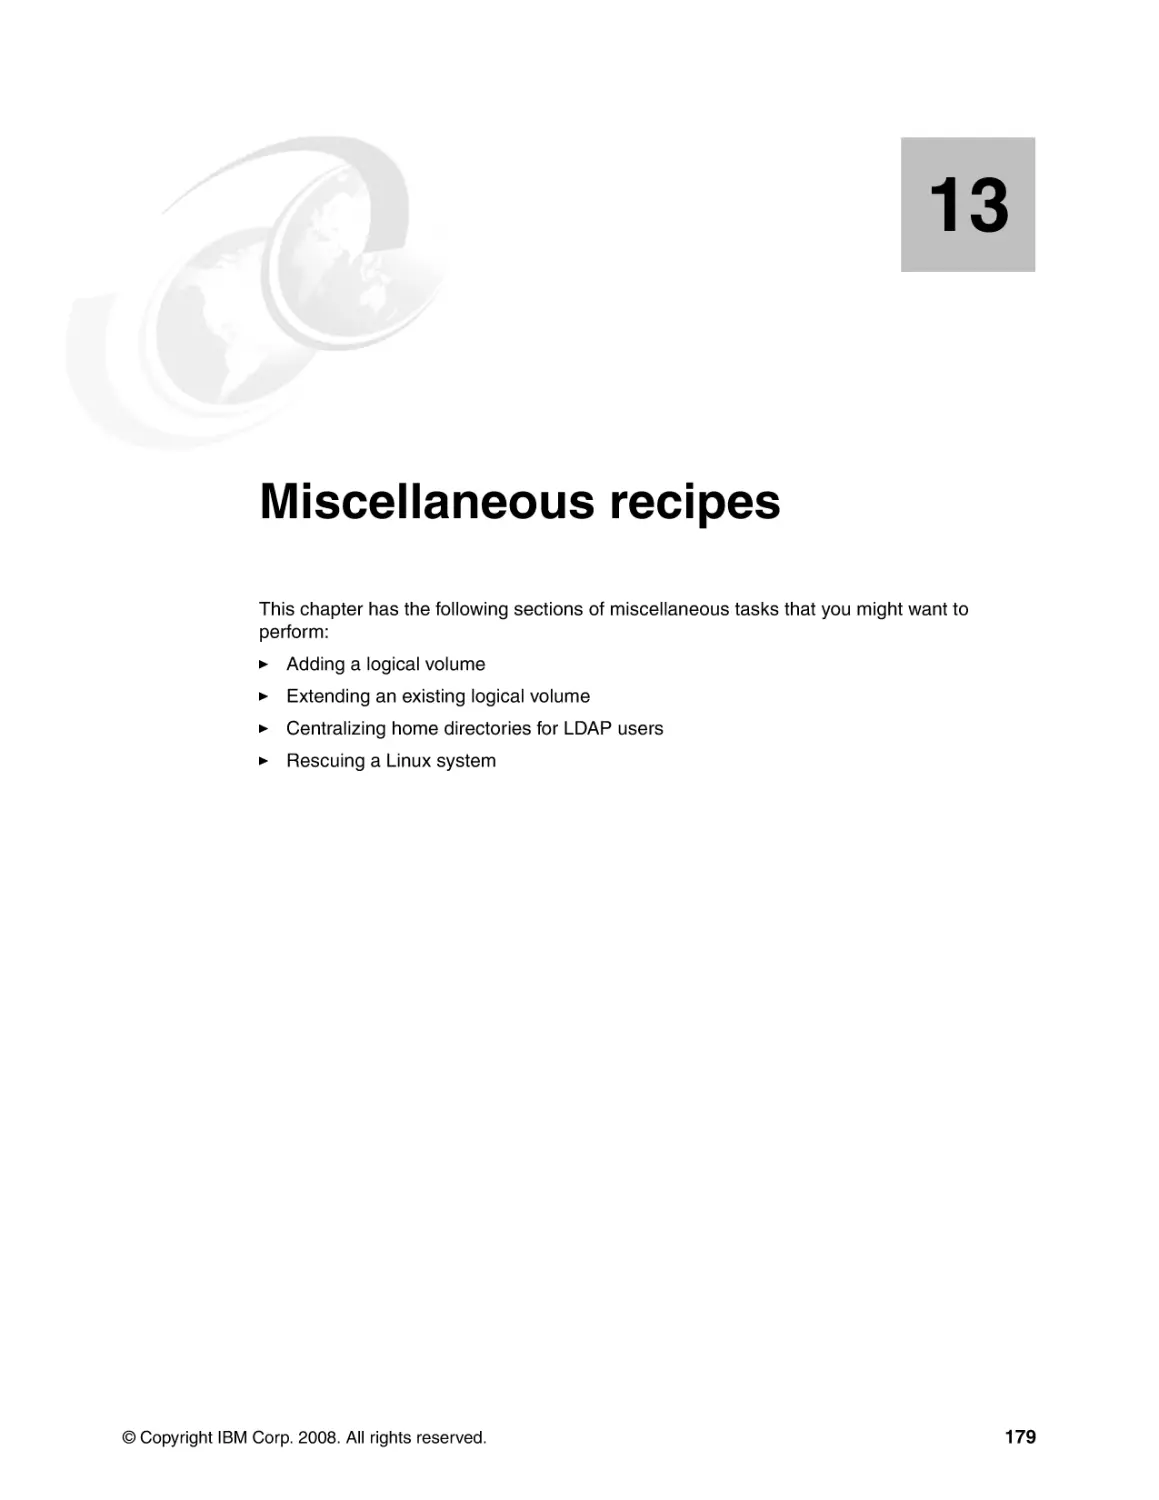 Chapter 13. Miscellaneous recipes